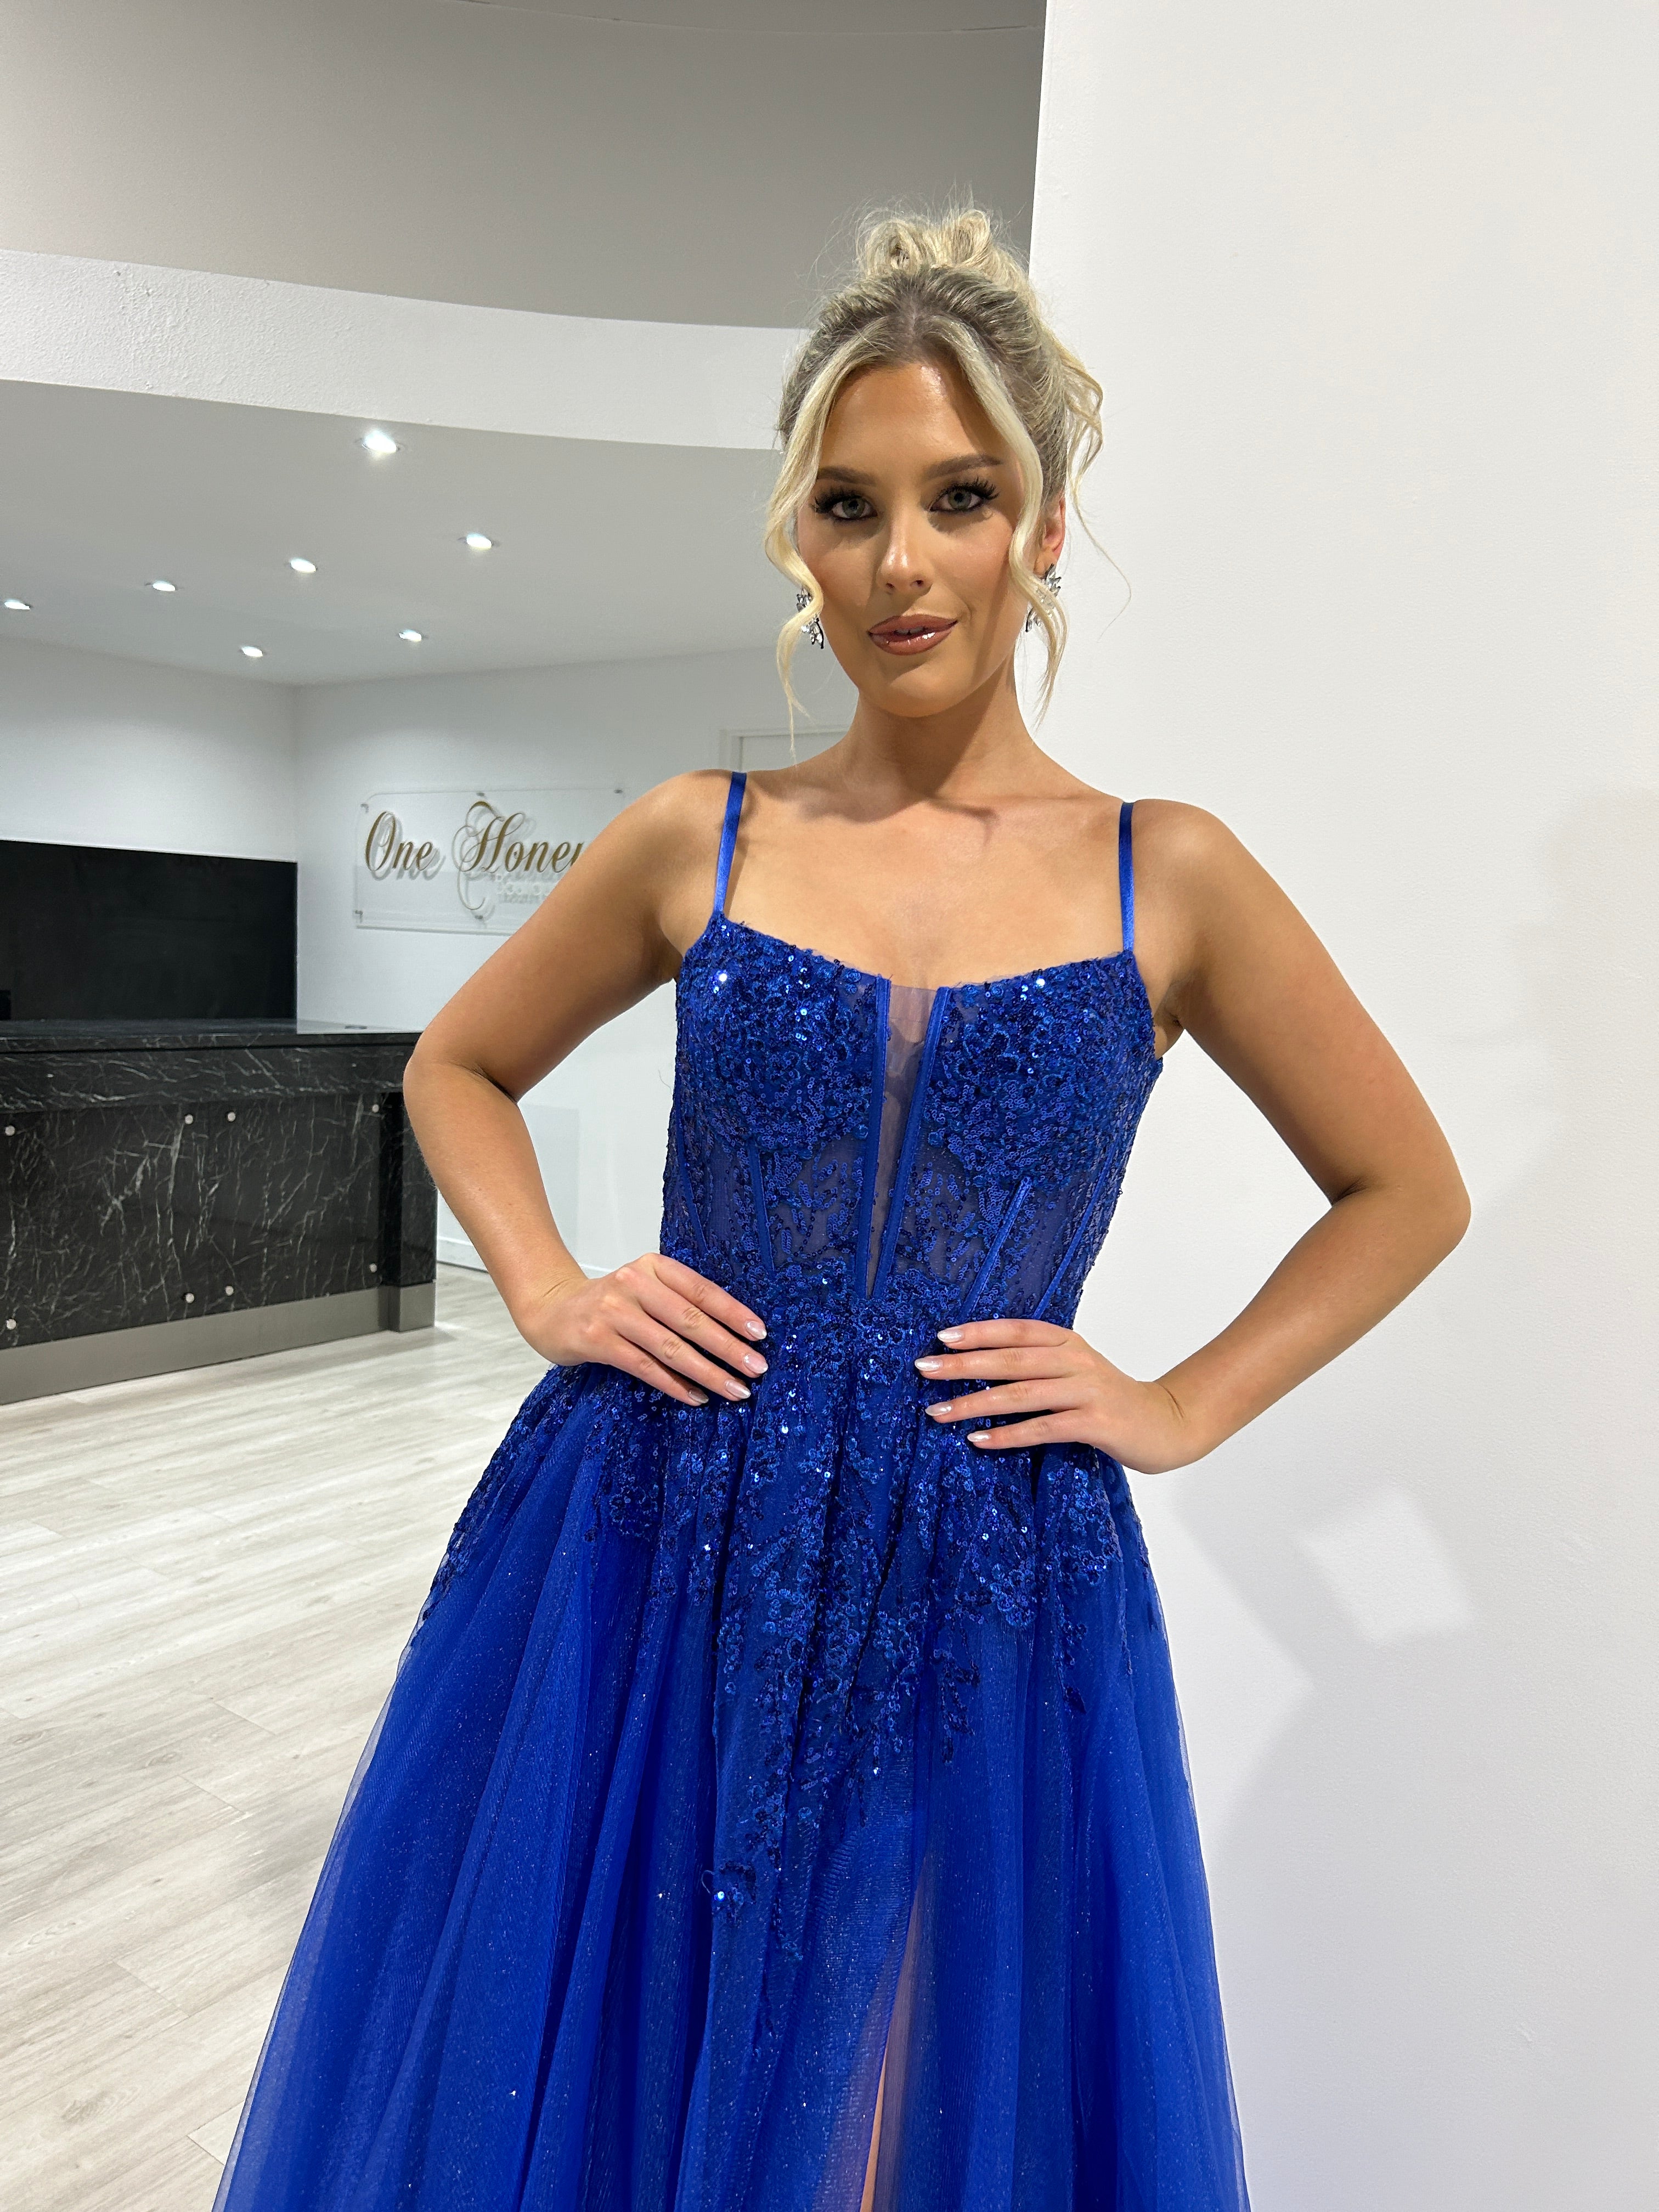 Honey Couture PANDORA Royal Blue Tulle Bustier Ball Gown Formal Dress